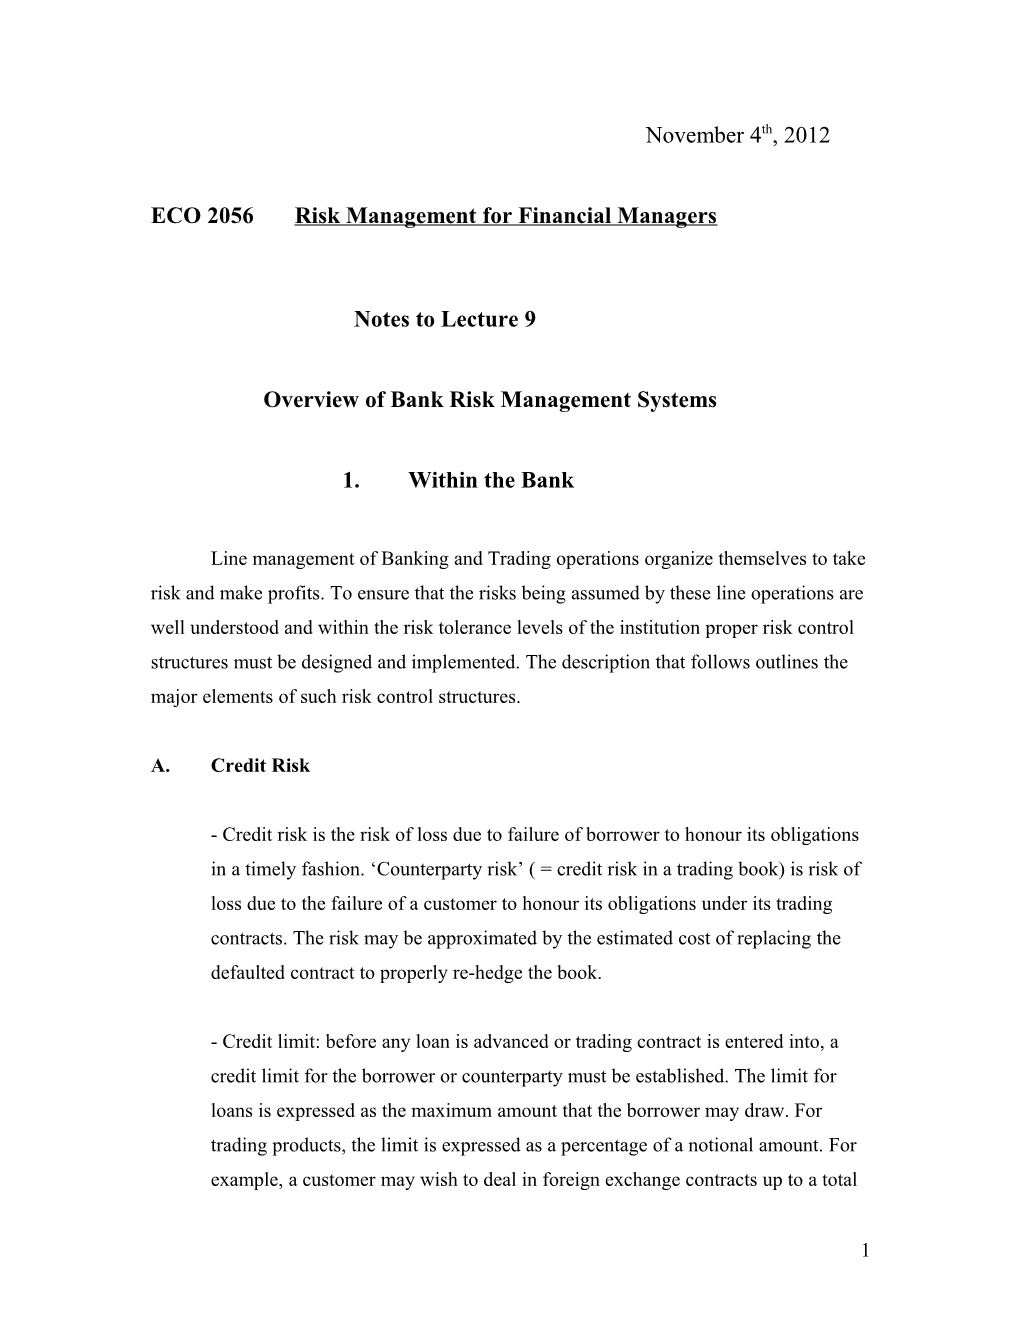 ECO 2056 Risk Management for Financial Managers